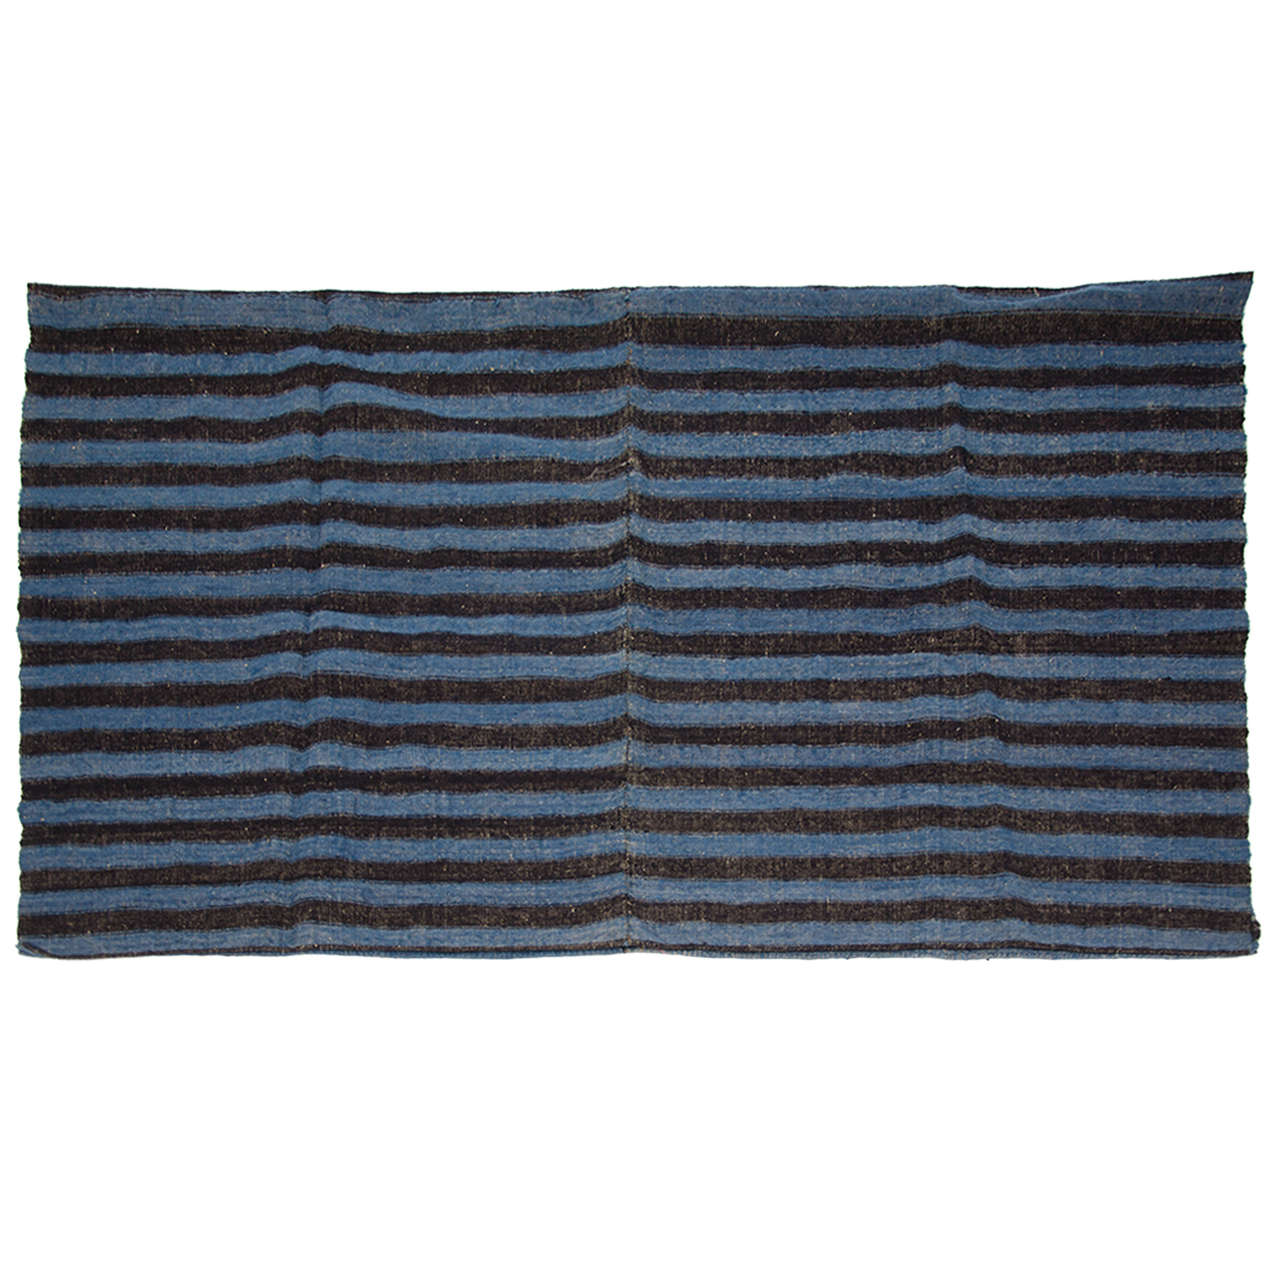 Early 19th Century Dutch striped Black & Blue Funeral Blanket For Sale